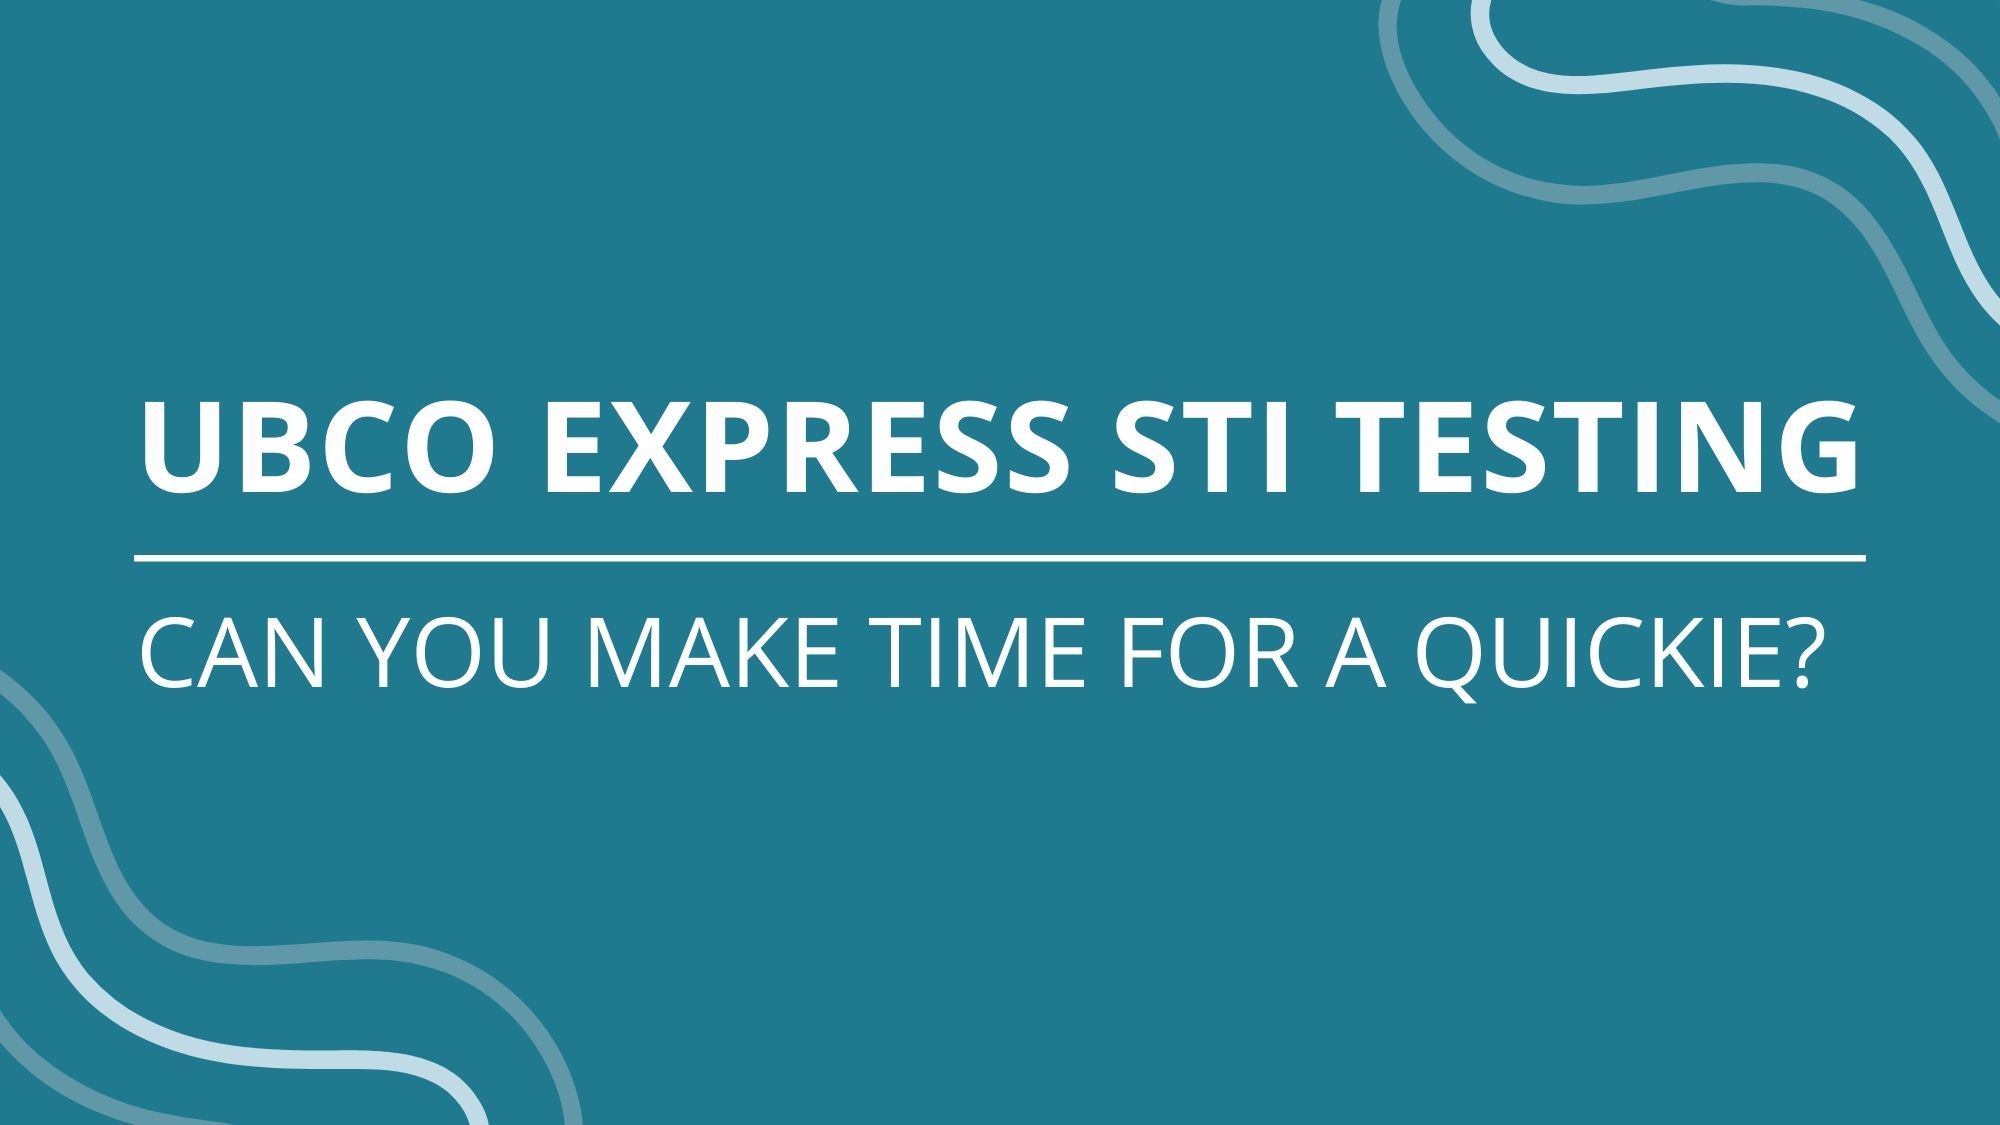 UBCO EXPRESS STI TESTING Can you make time for a quickie?